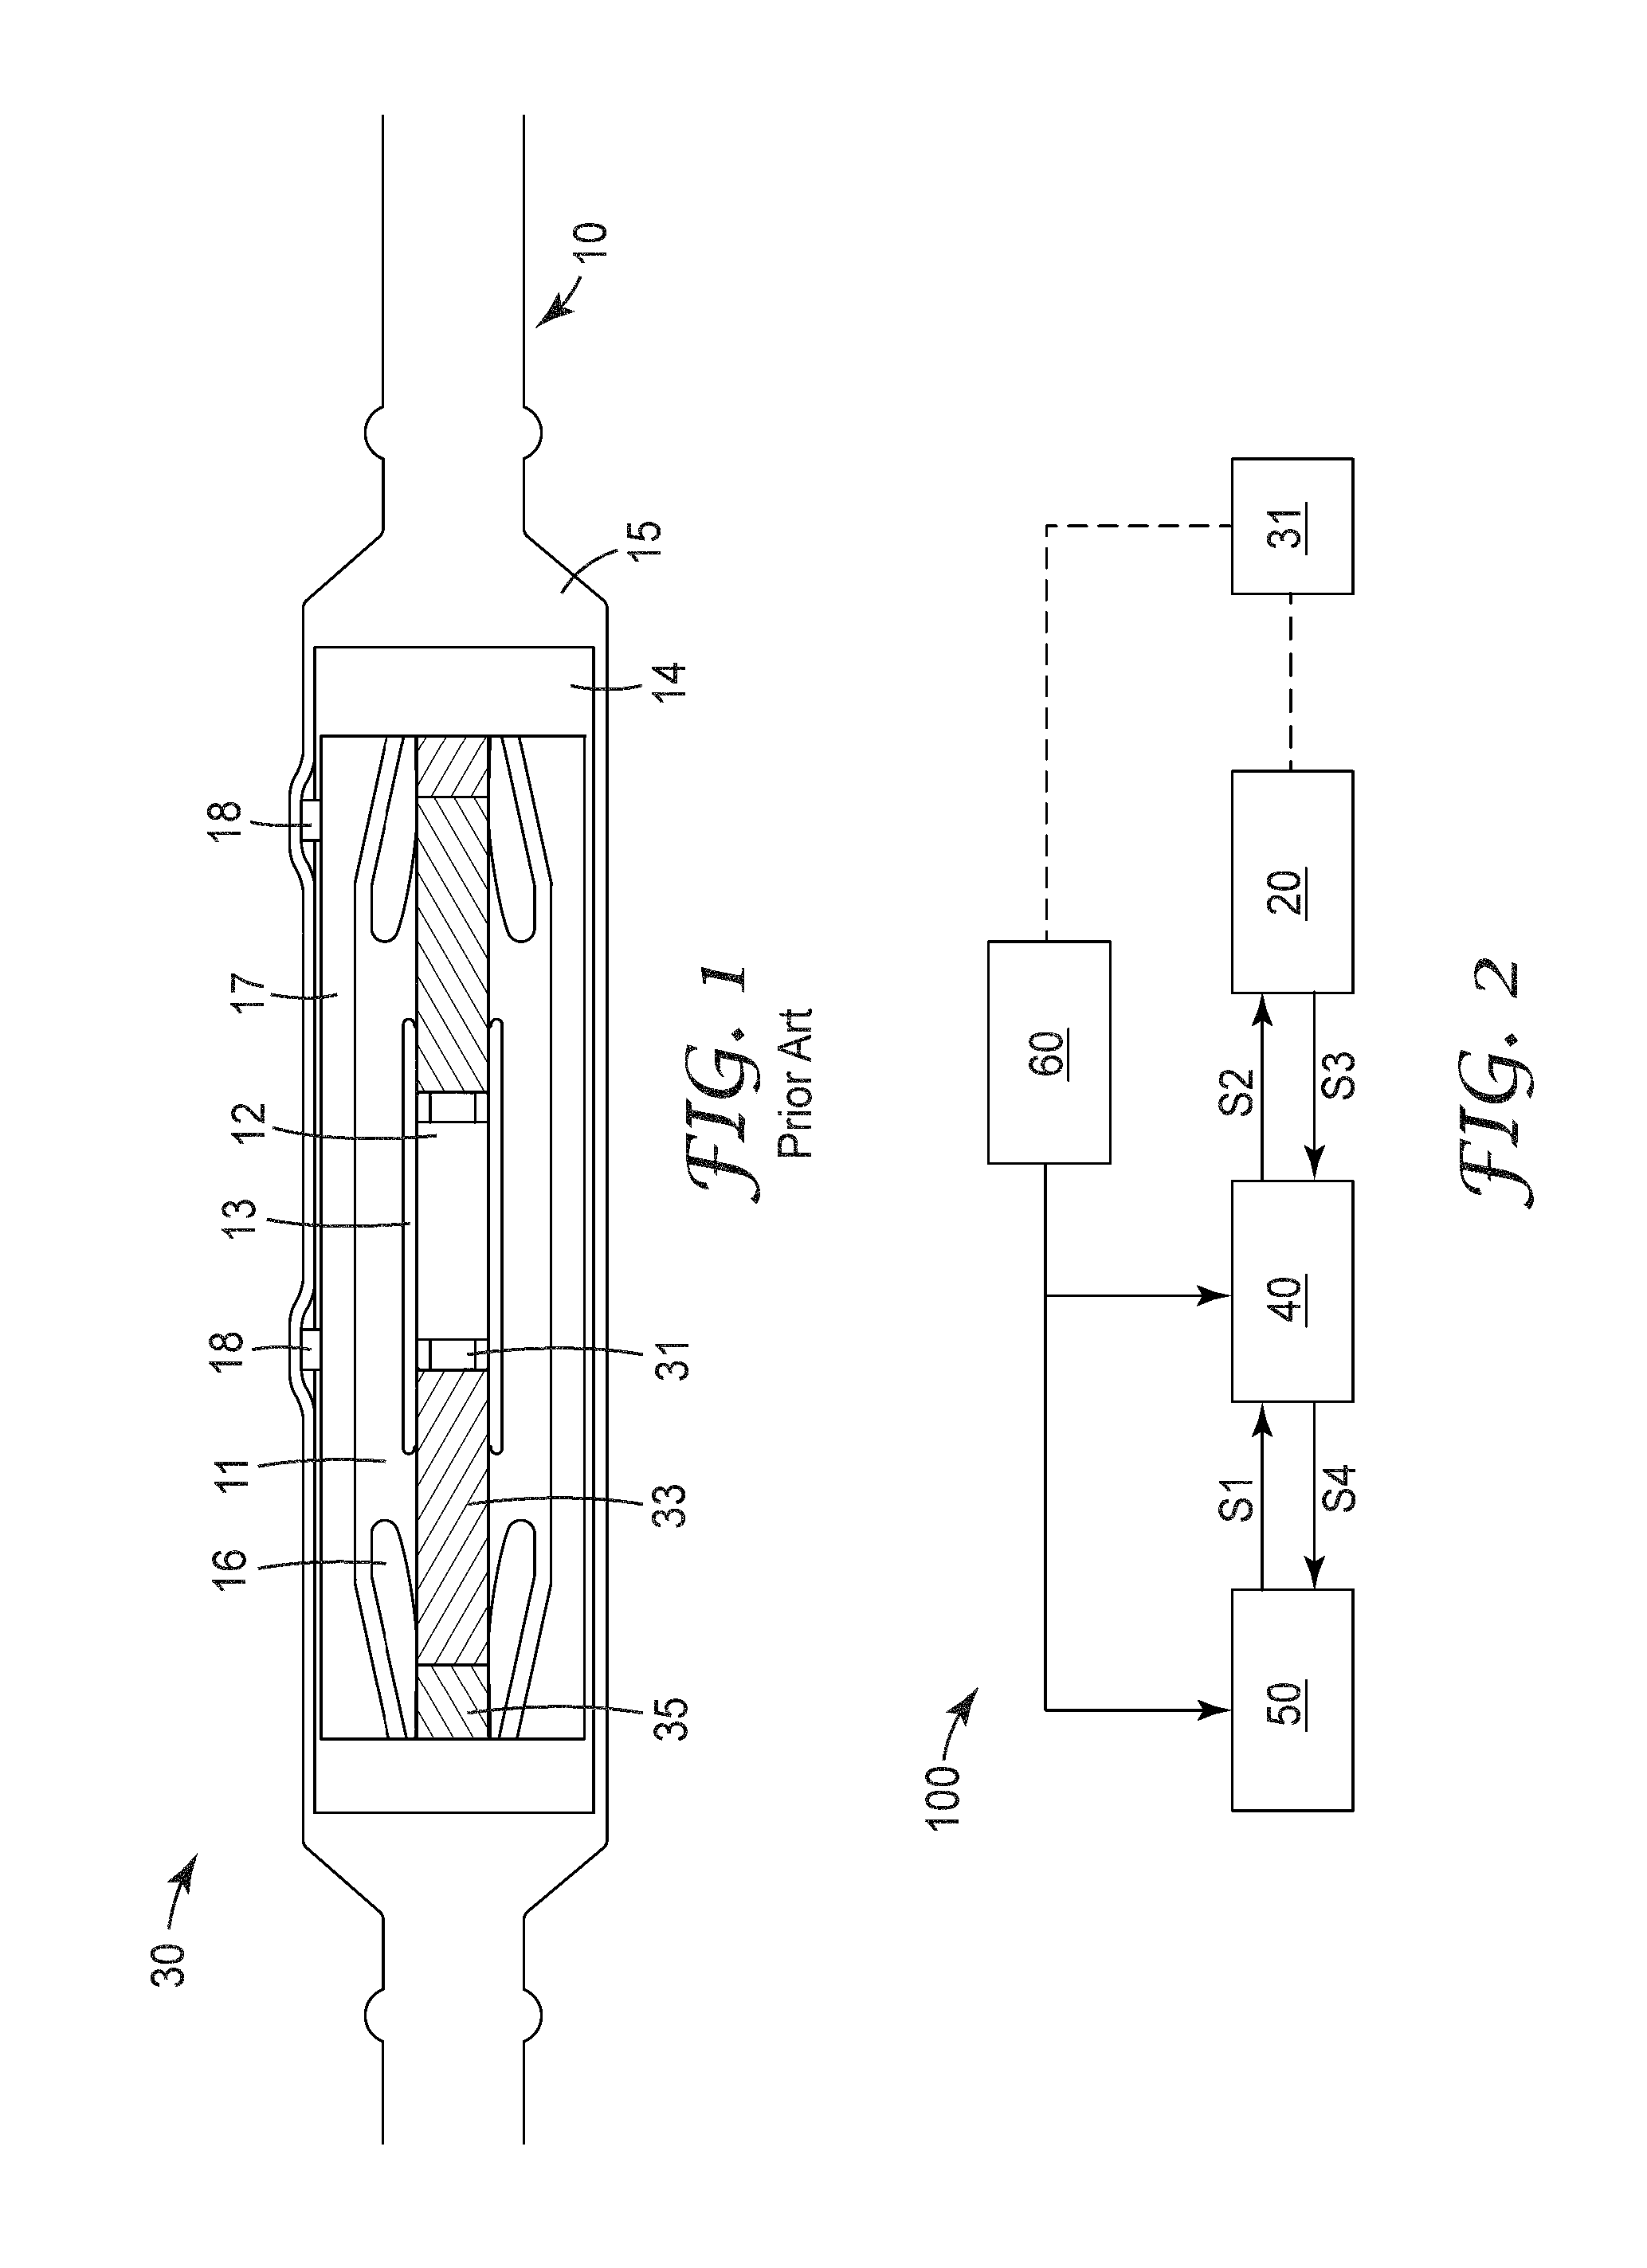 System for monitoring temperature of electrical conductor